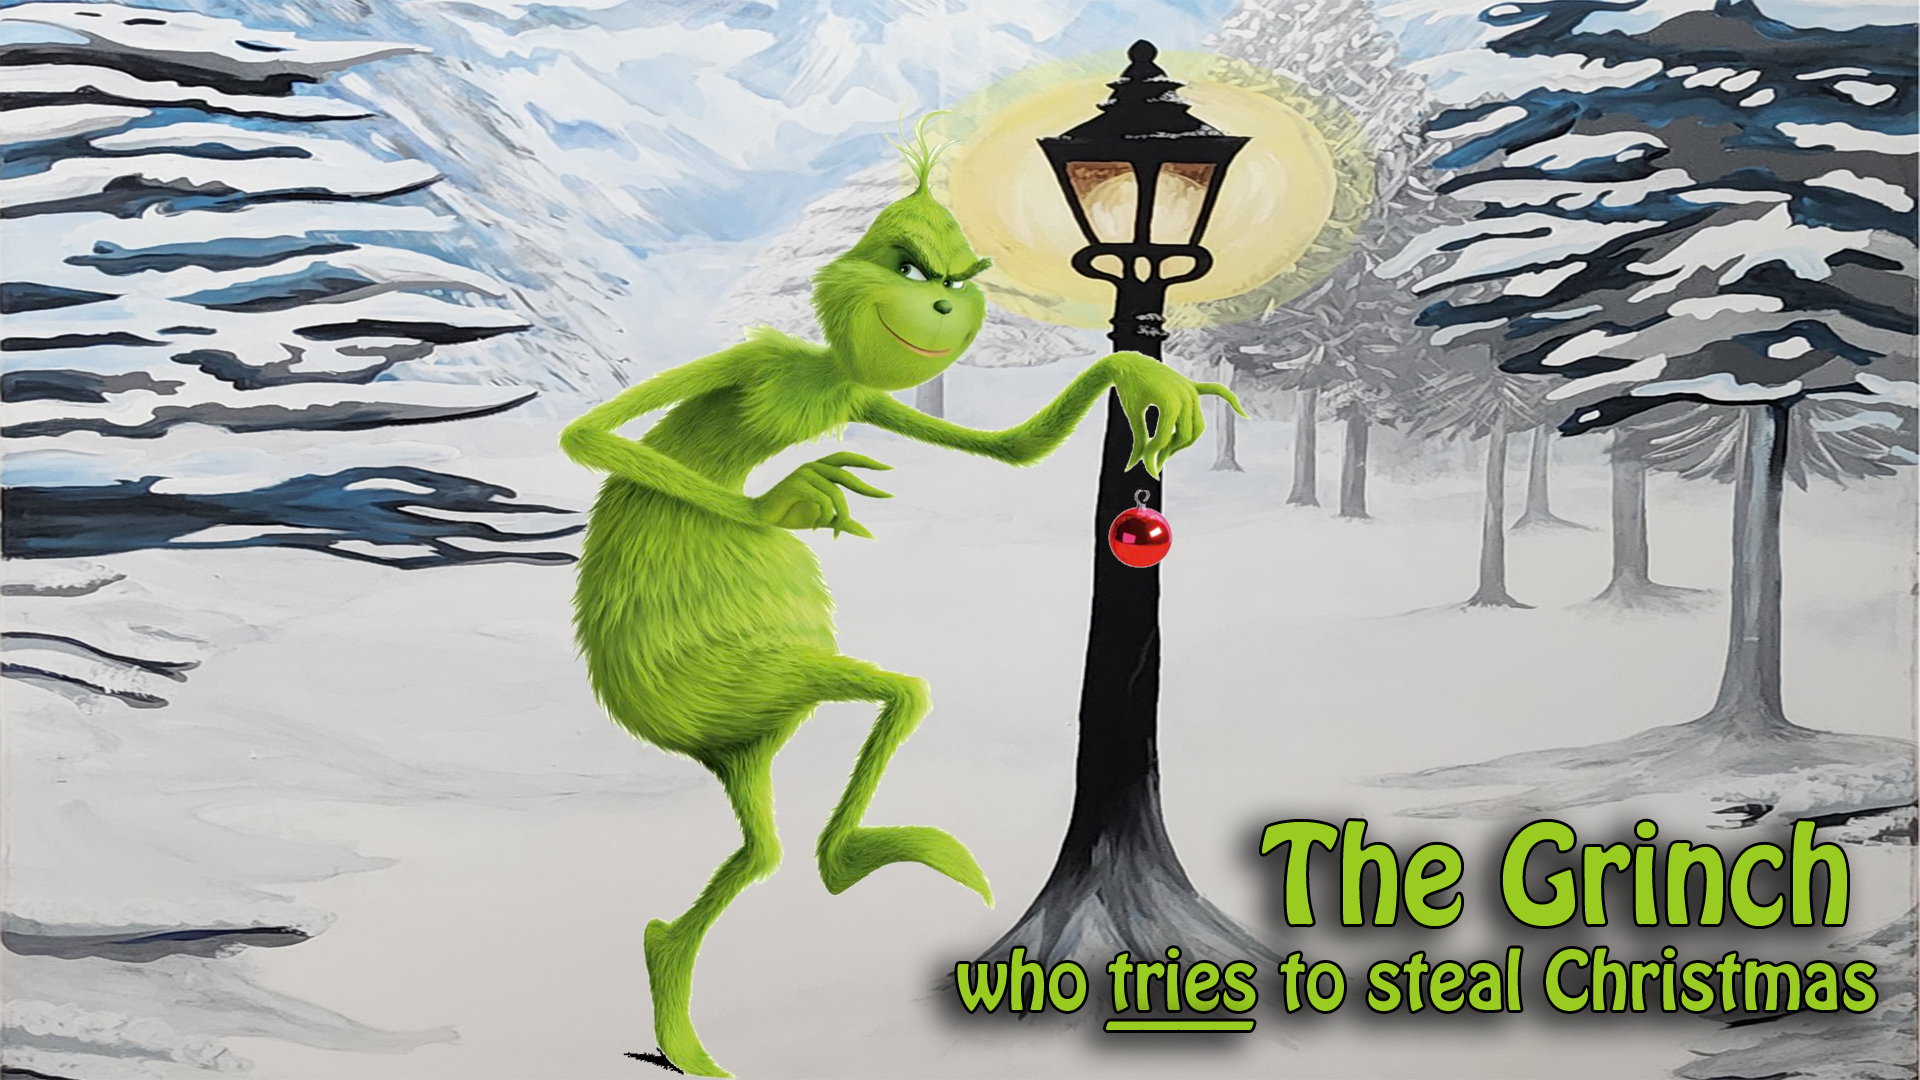 The Grinch who tries to steal Christmas – Part 1: The Grinch didn’t see it coming